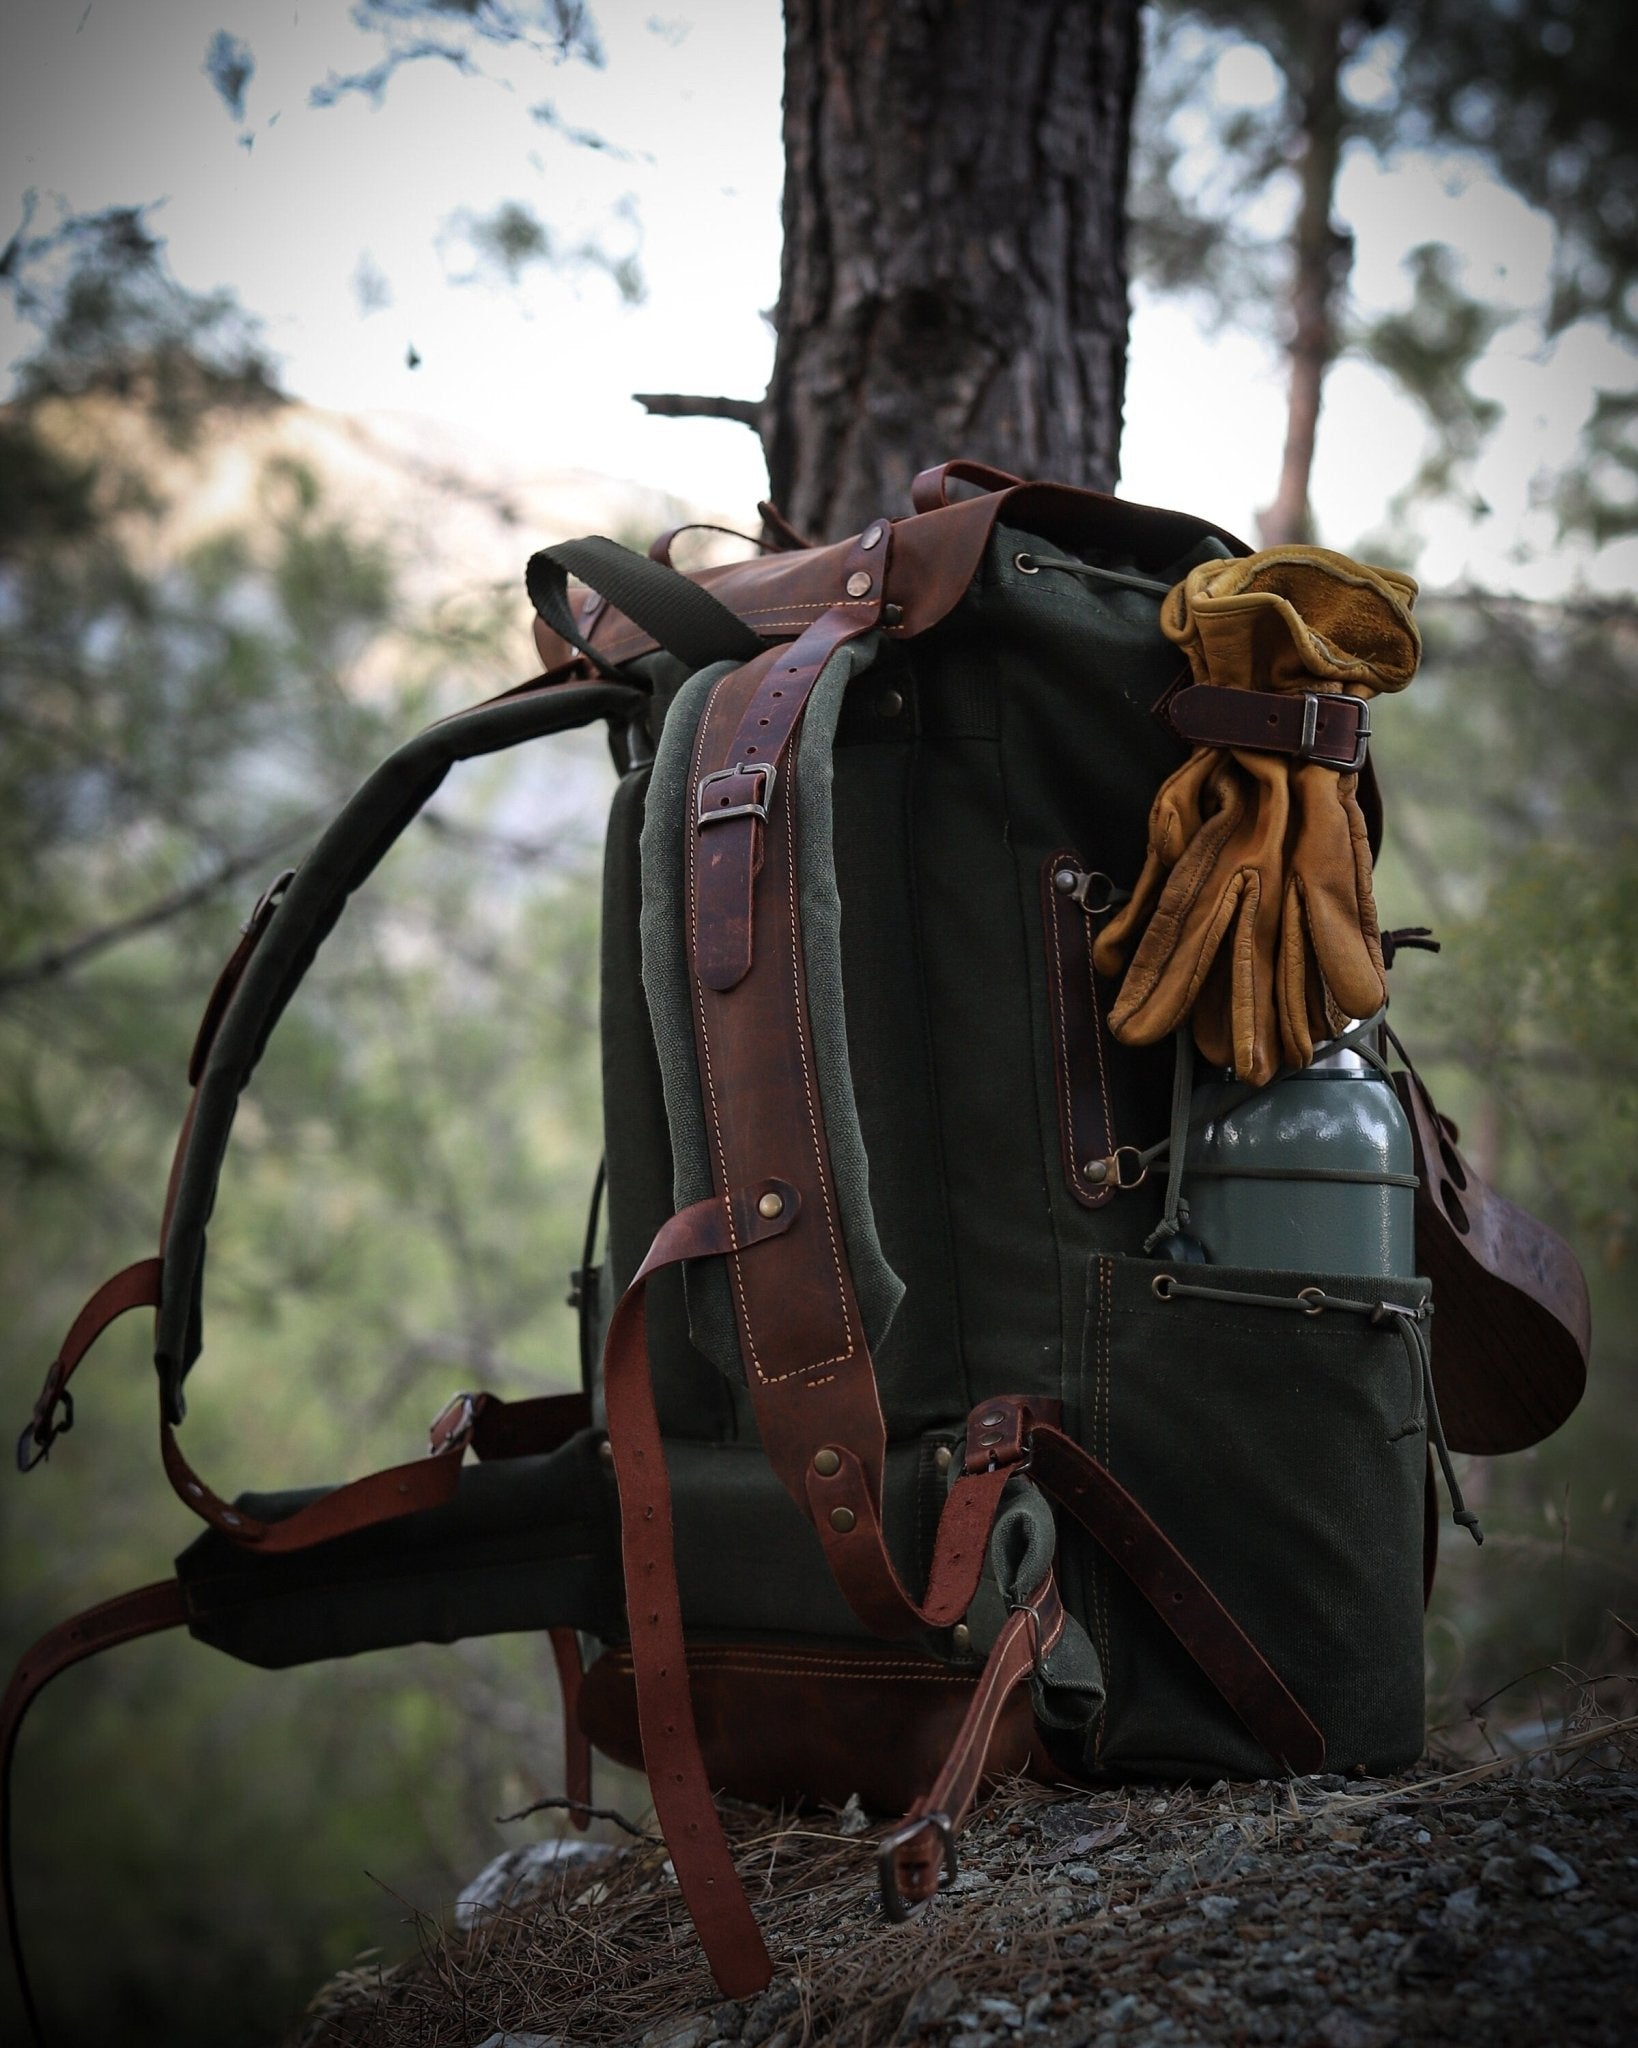 80L to 30L Size Options | Extra large | Handmade | Leather | Waxed Canvas Backpack | Camping, Hunting, Bushcraft, Travel | Personalization  99percenthandmade 30 Green 